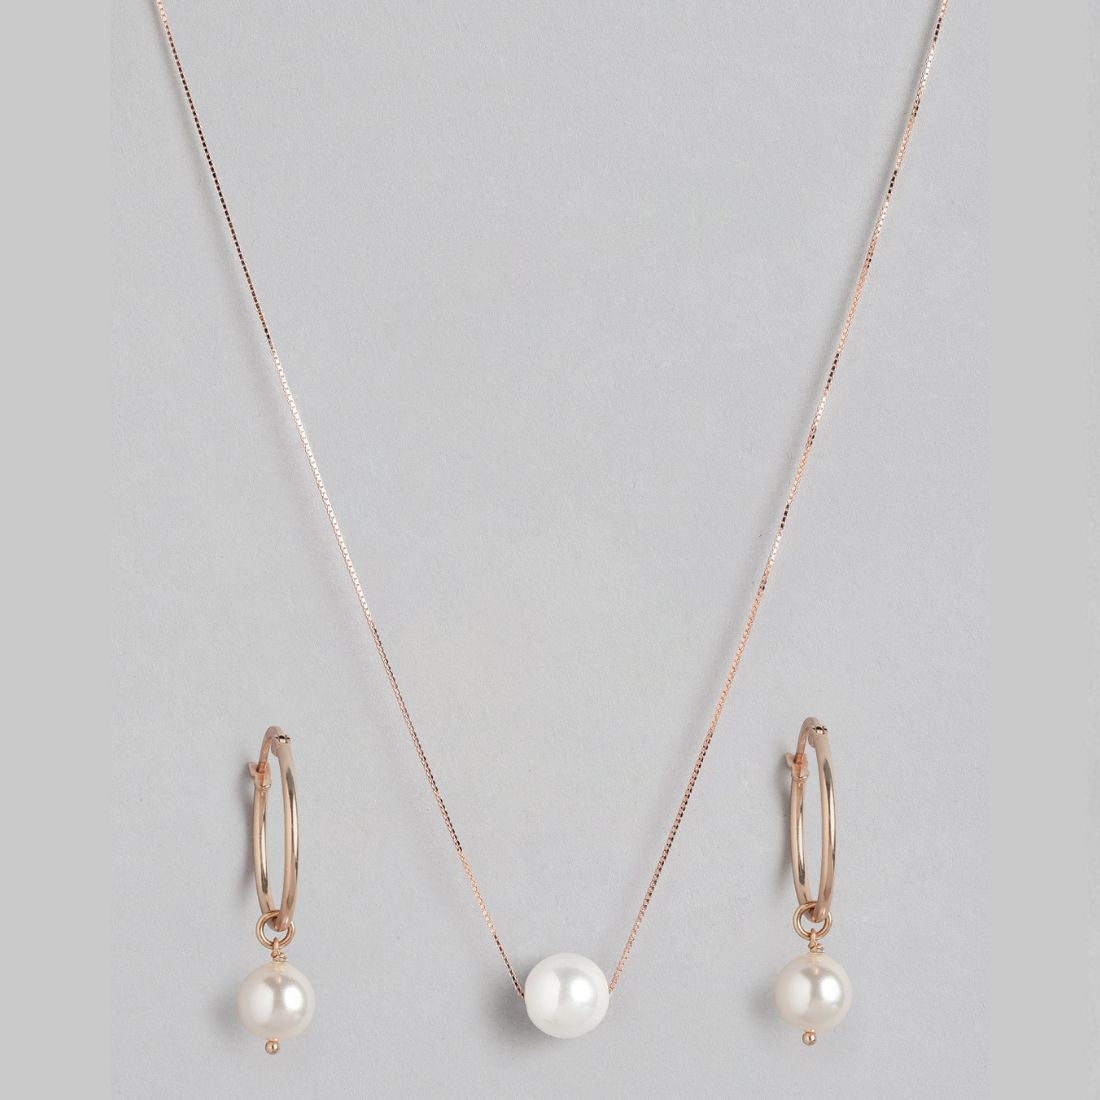 Radiant Rosewater Rose Gold-Plated 925 Sterling Silver Jewelry Set with Freshwater Pearls